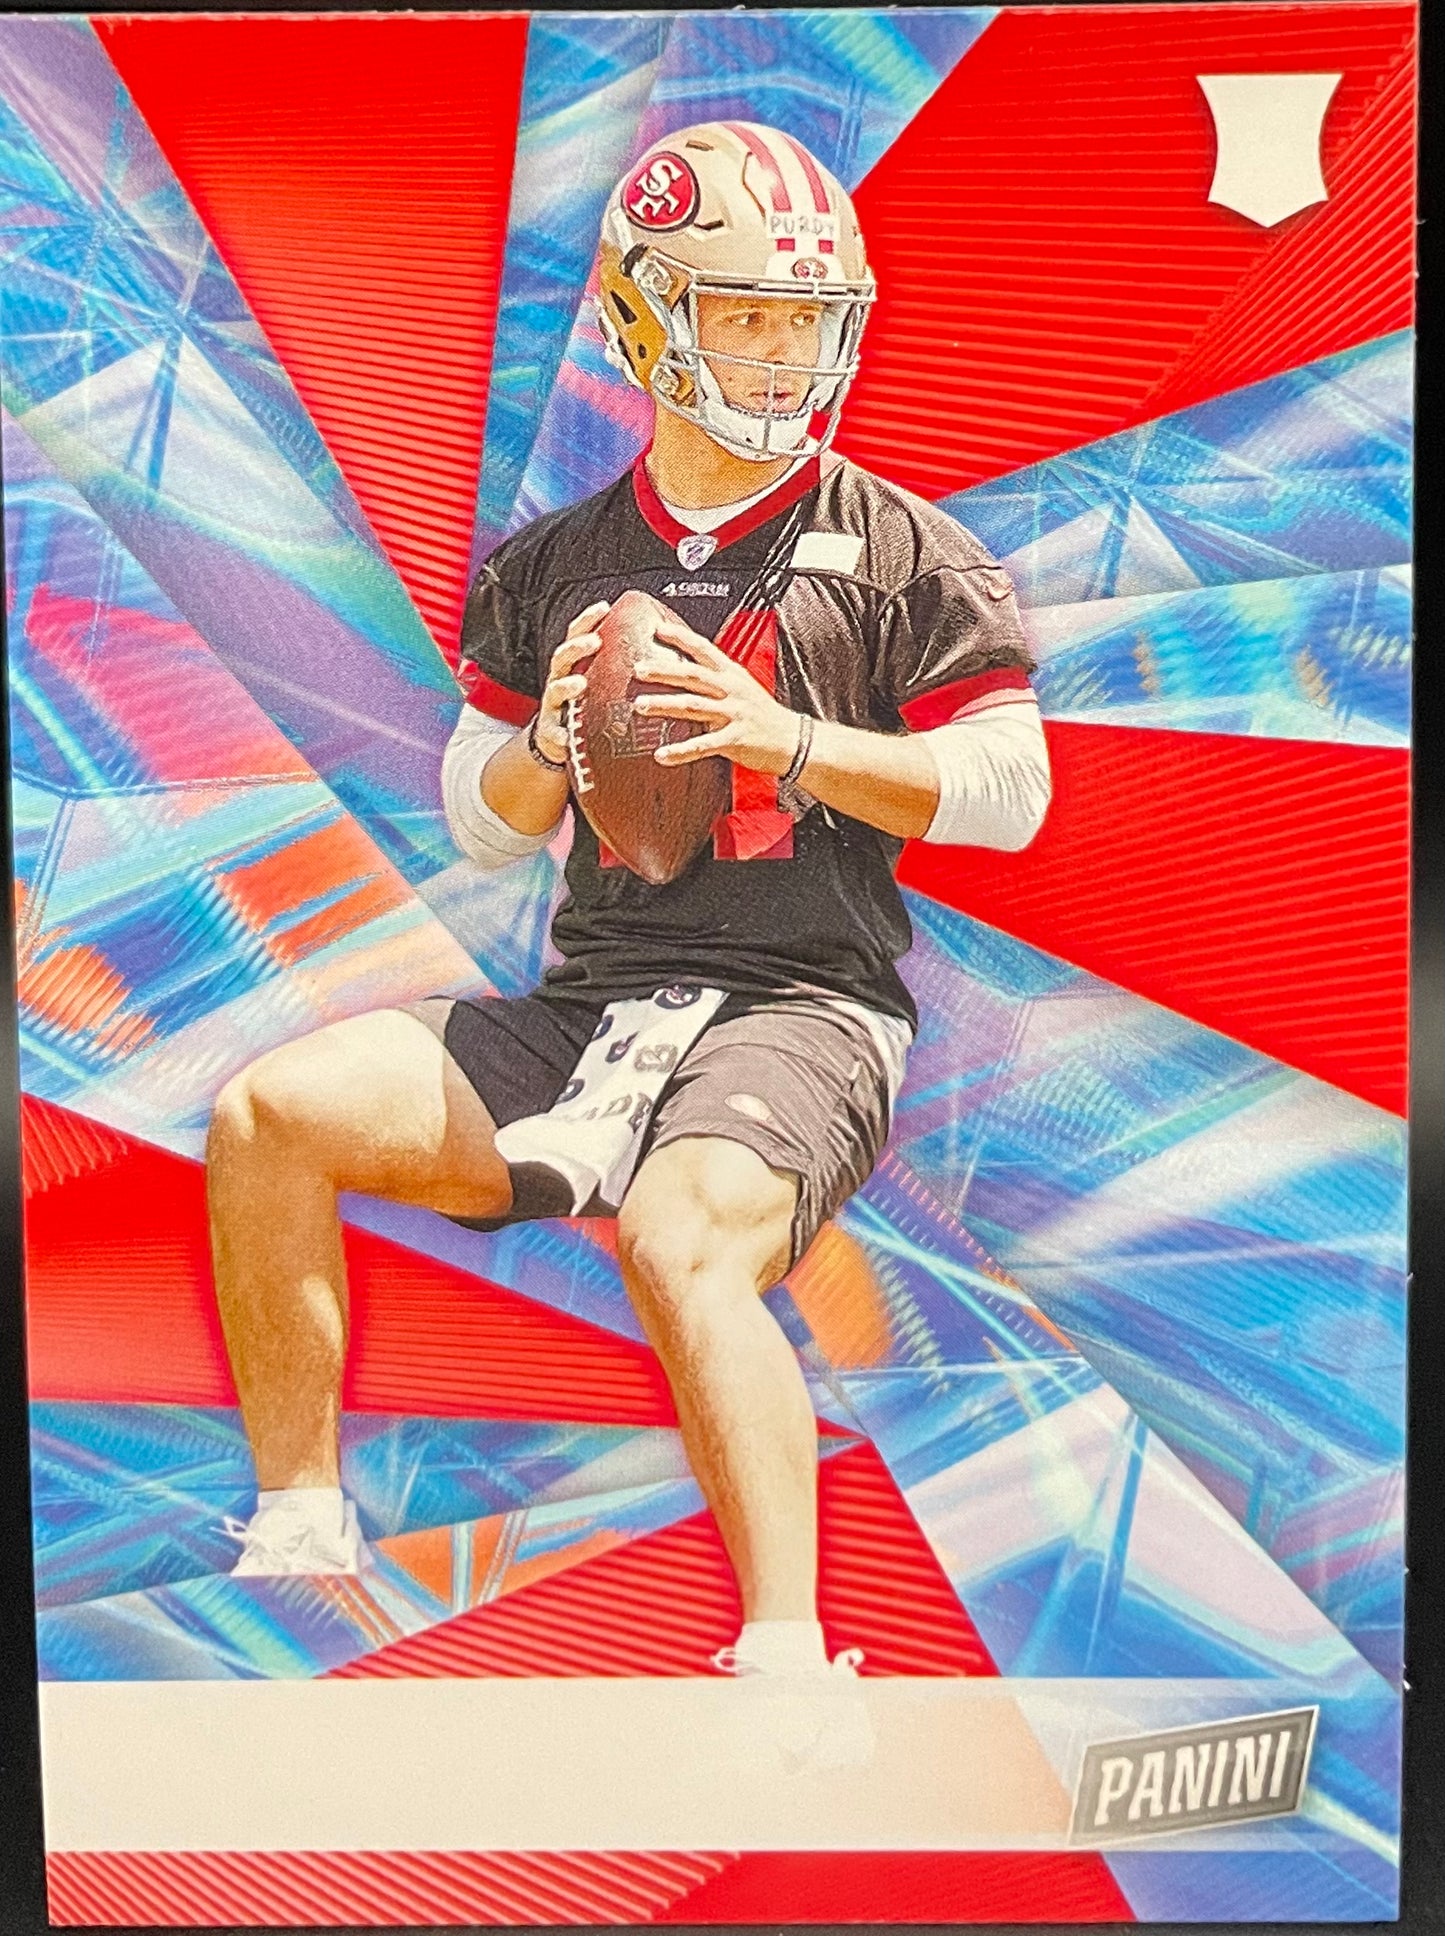 Brock Purdy 2022 Panini player of the day ERROR CARD NO NAME #58 San Francisco 49ers mr. irrelevant ￼￼